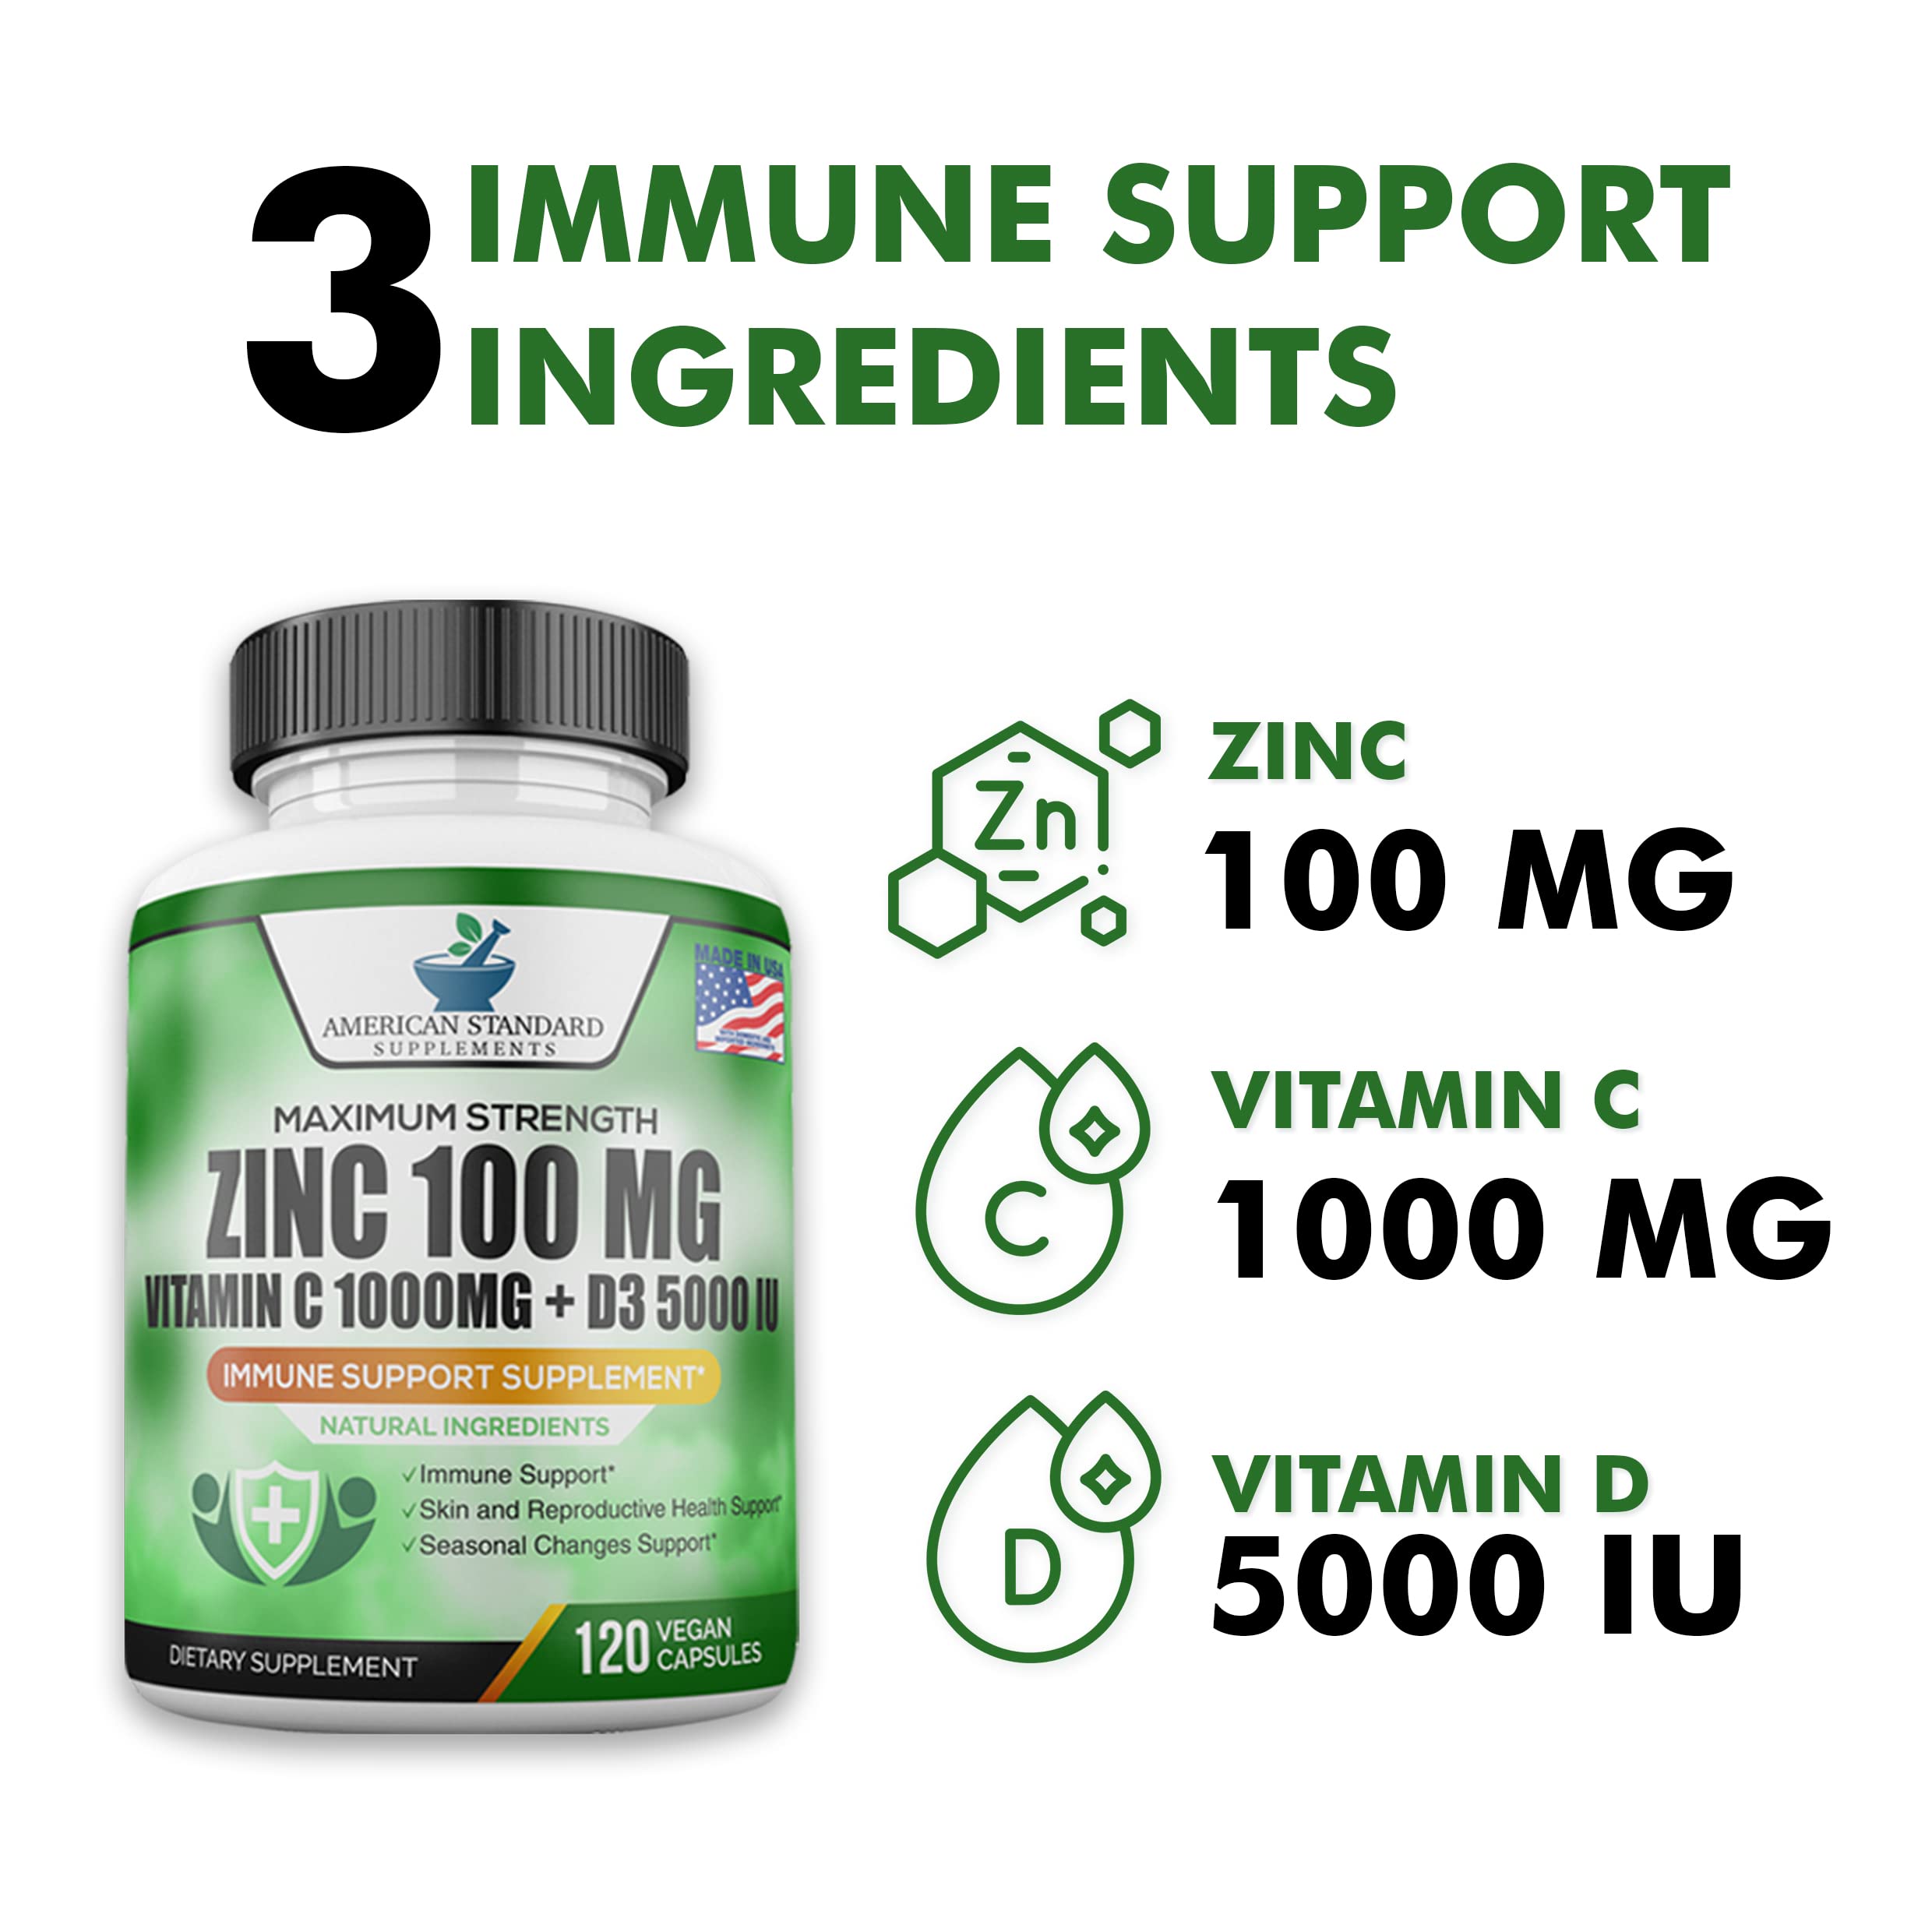 Zinc 100mg, Vitamin C 1000mg, Vitamin D 5000IU per Serving, Immune Support for Adults, Immune System Booster Supplements, Non GMO, No Filler, No Stearate, 120 Vegan Capsules, 60 Day Supply